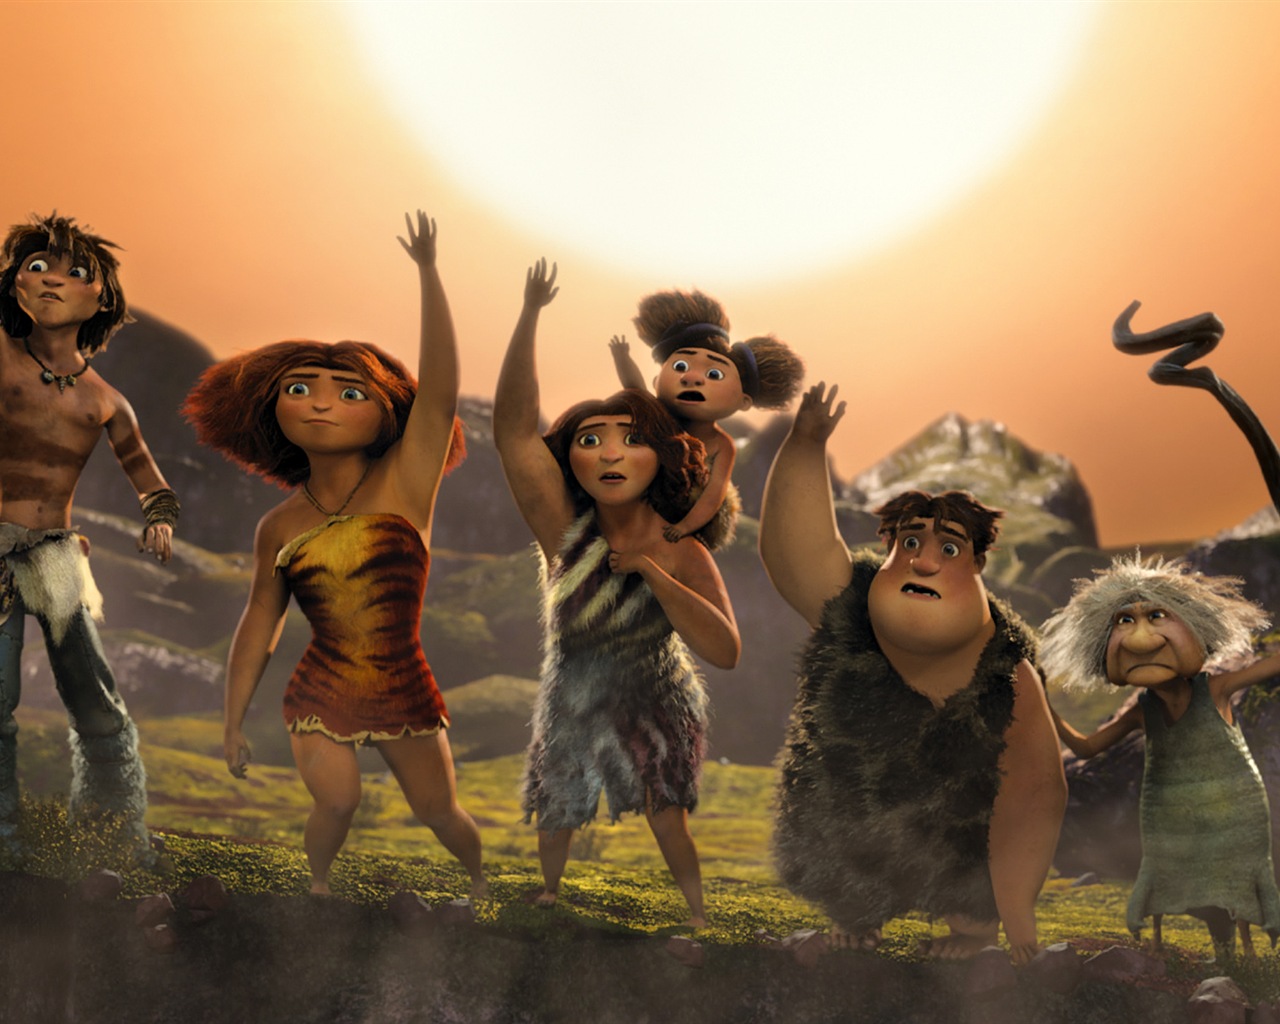 The Croods HD movie wallpapers #4 - 1280x1024